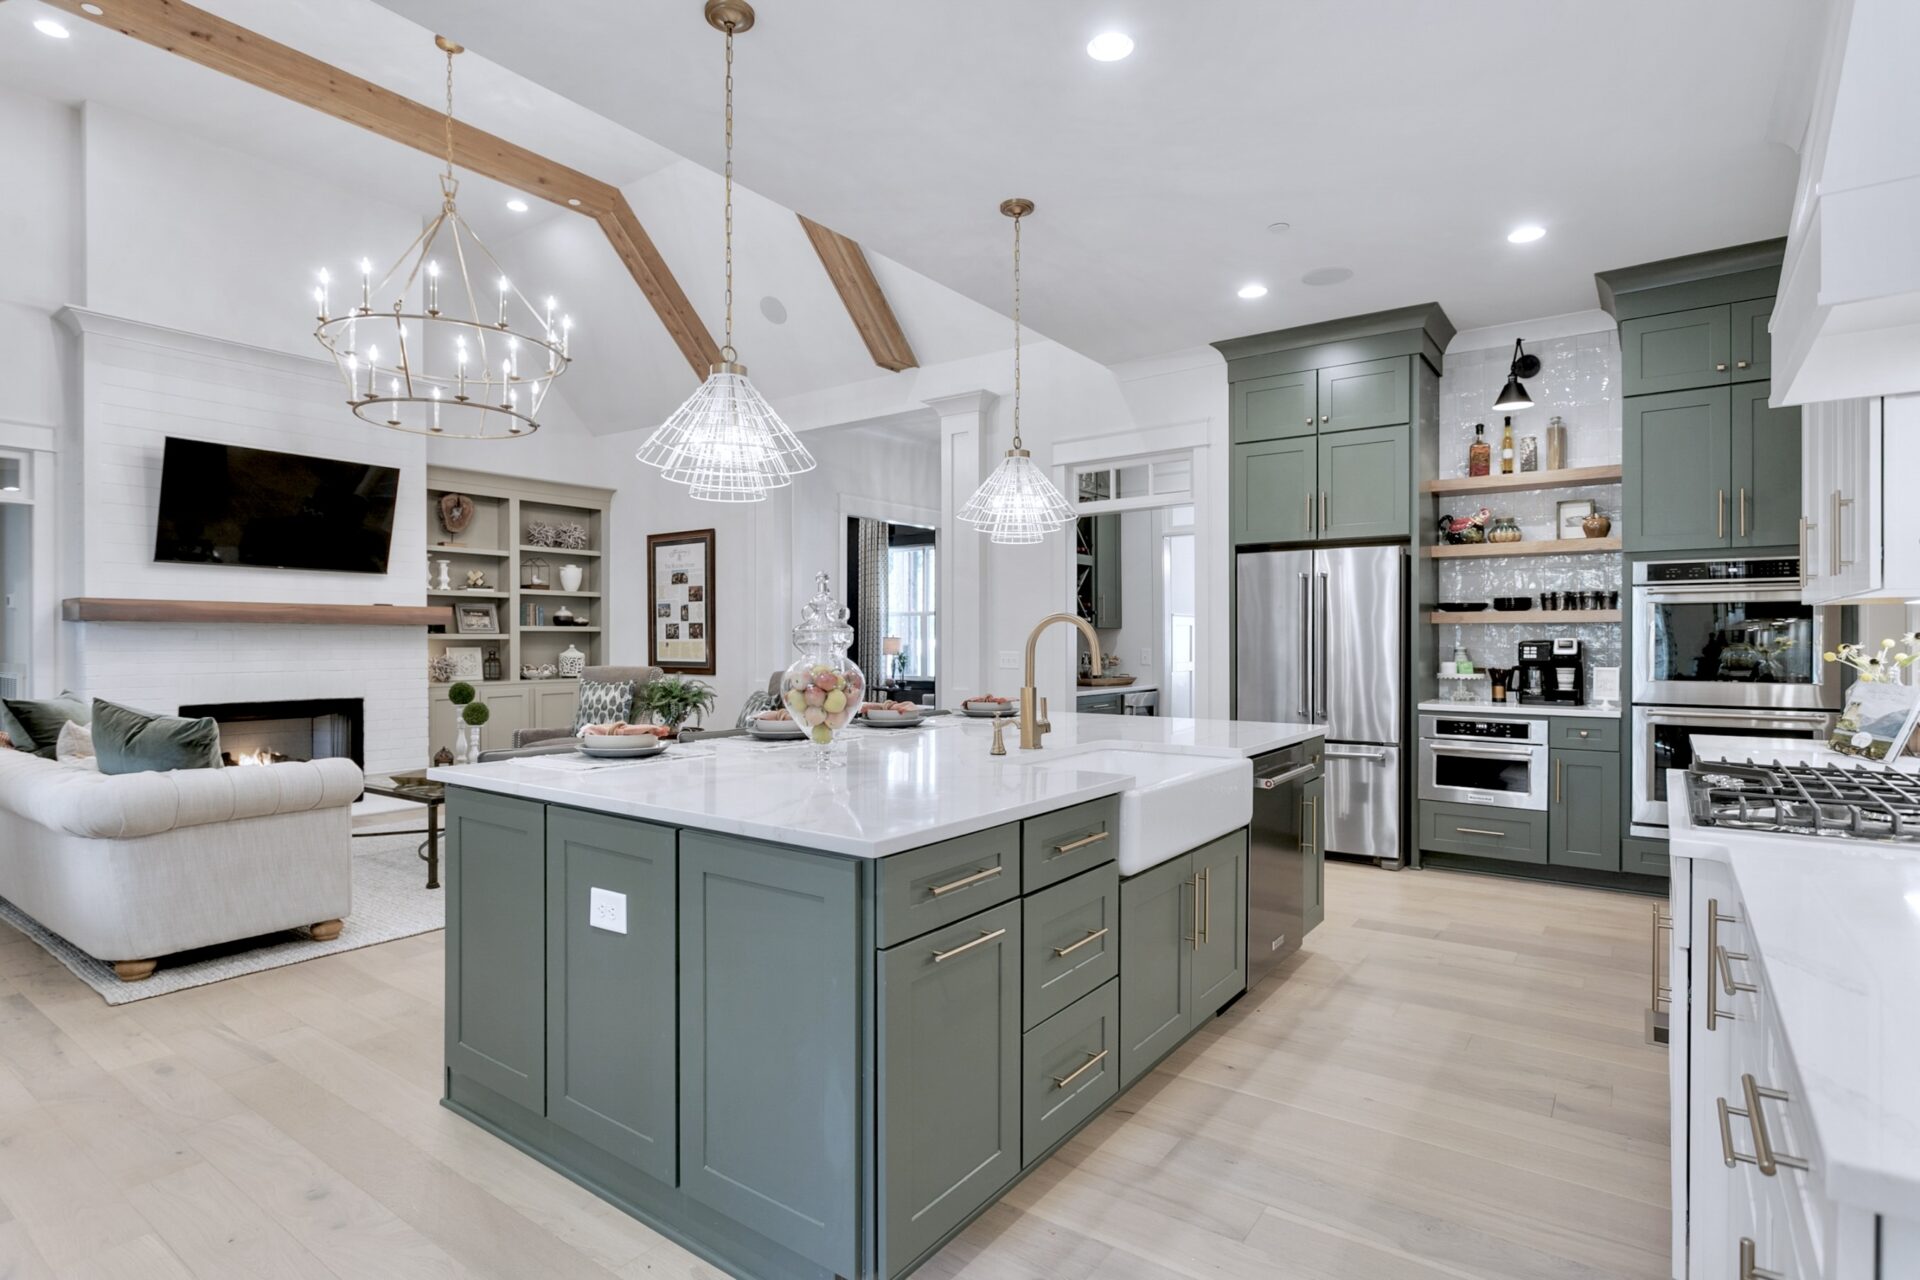 Modern Kitchen and Living Room | Nashville Luxury Homes - Home Builders